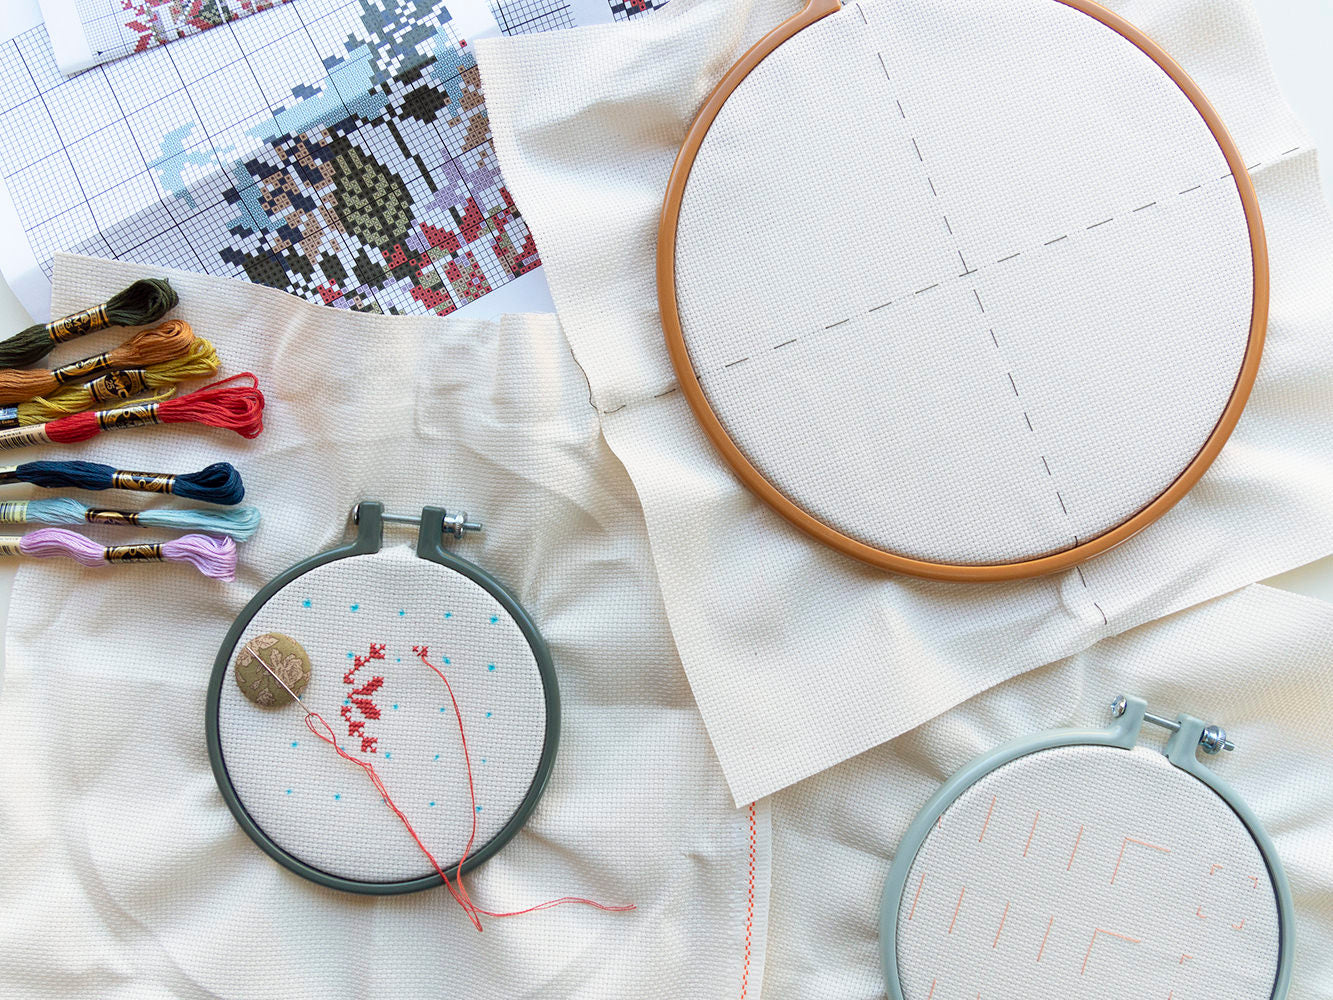 How to Begin Your First Large Cross Stitch Project | Tutorial - Ysolda